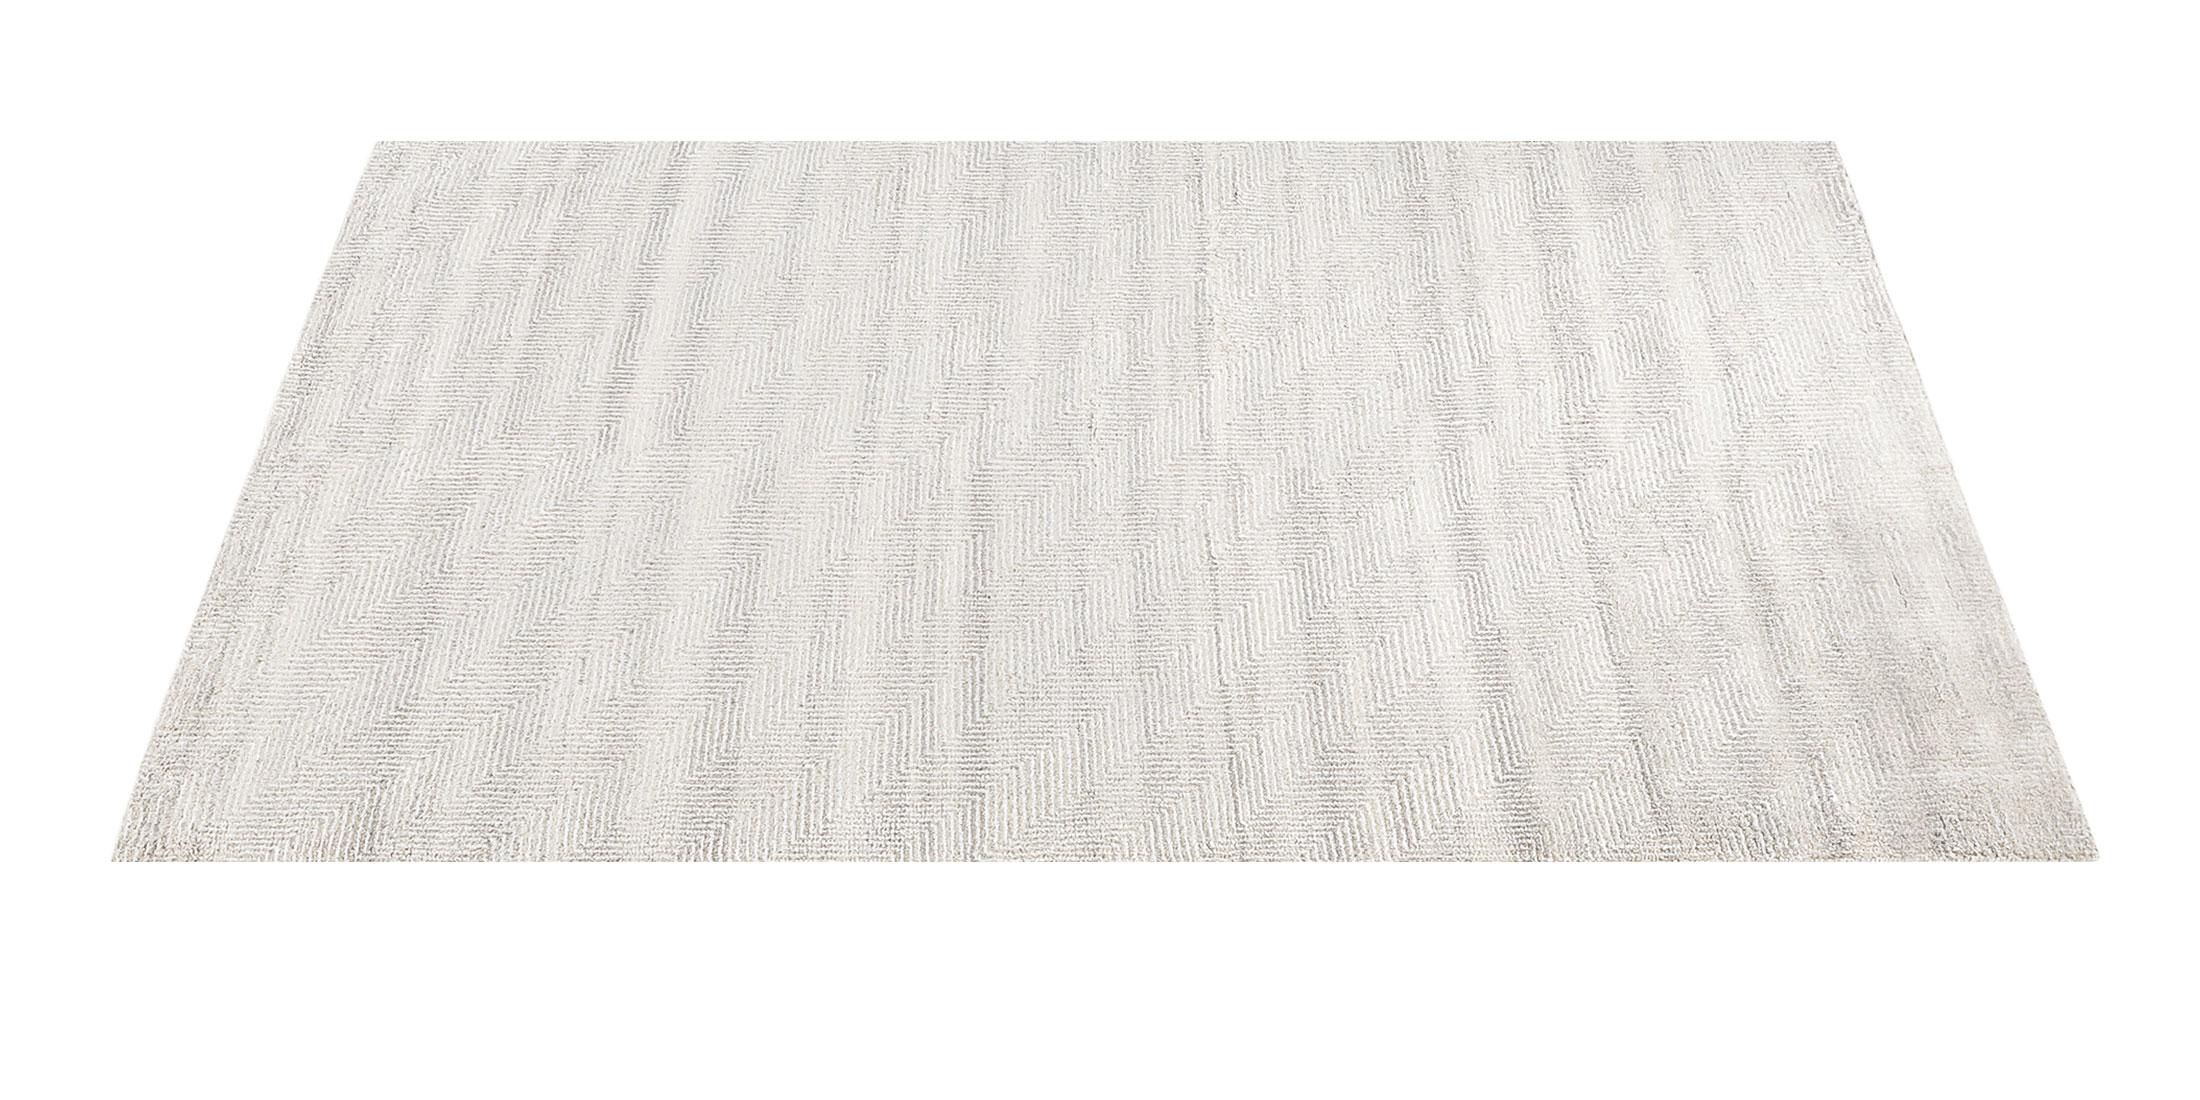 For Sale: Beige (Sand) Ben Soleimani Vello Rug– Hand-knotted Wool + Viscose Ash/Silver 9'x12' 2